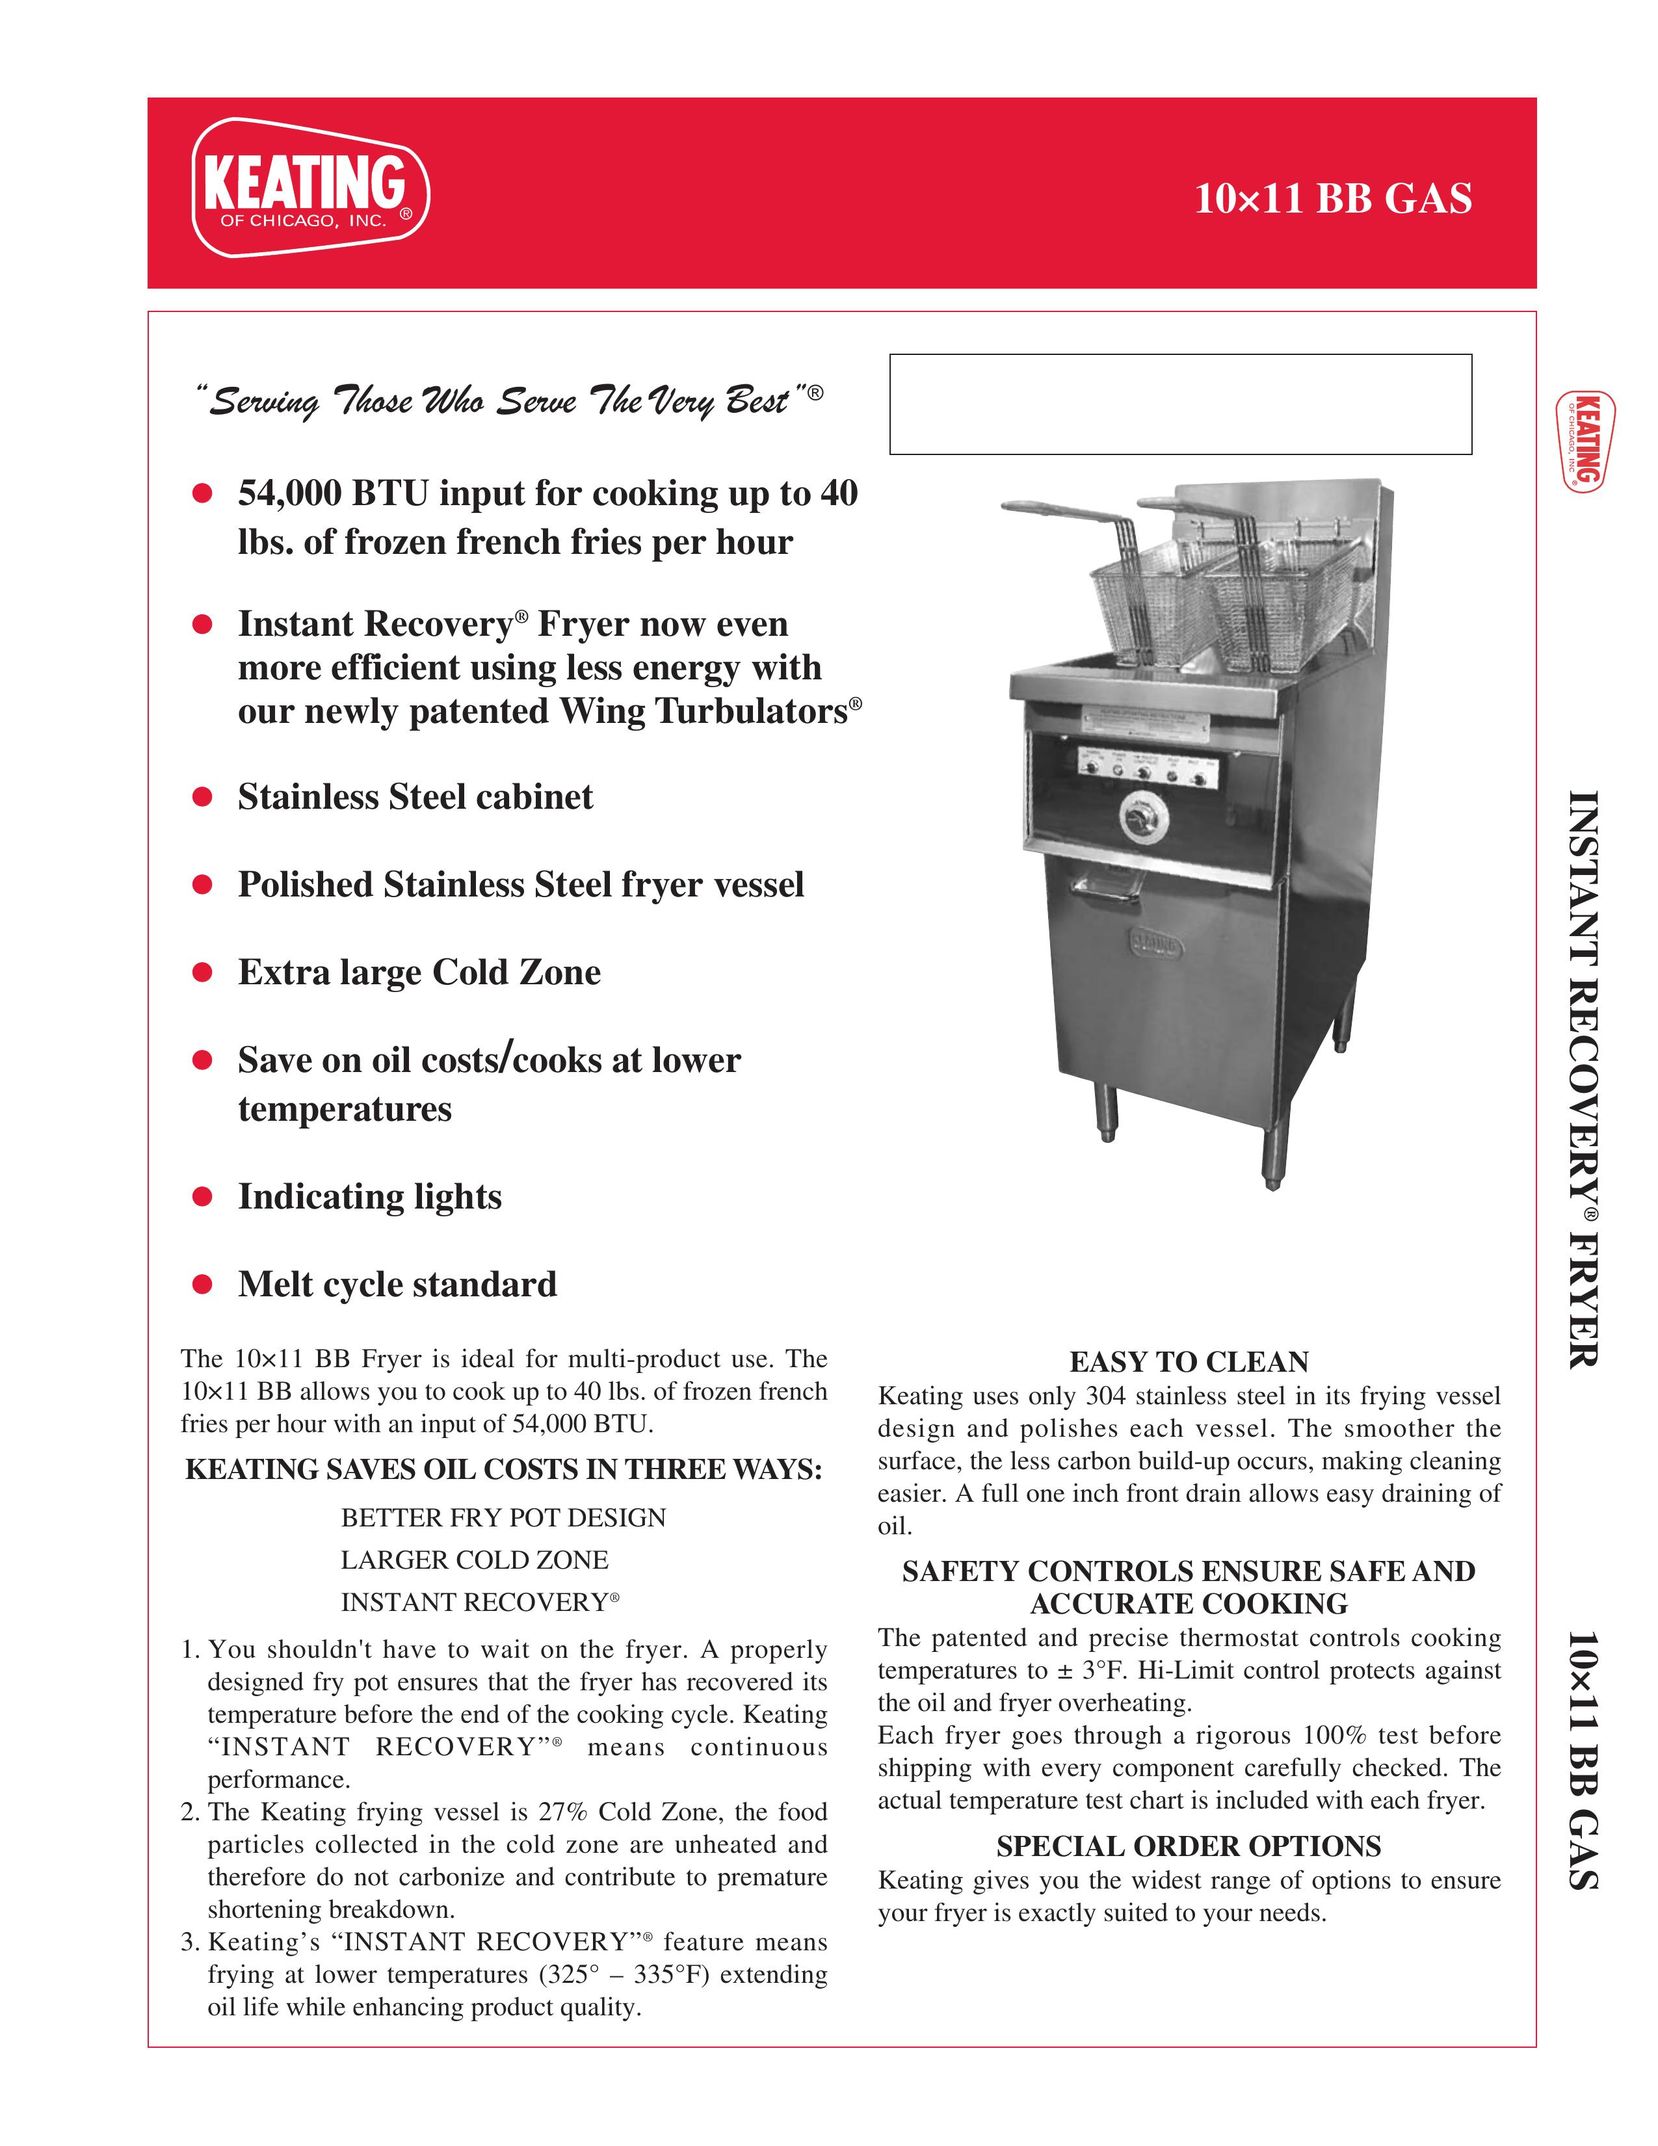 Keating Of Chicago 10x11 BB Gas Fryer User Manual